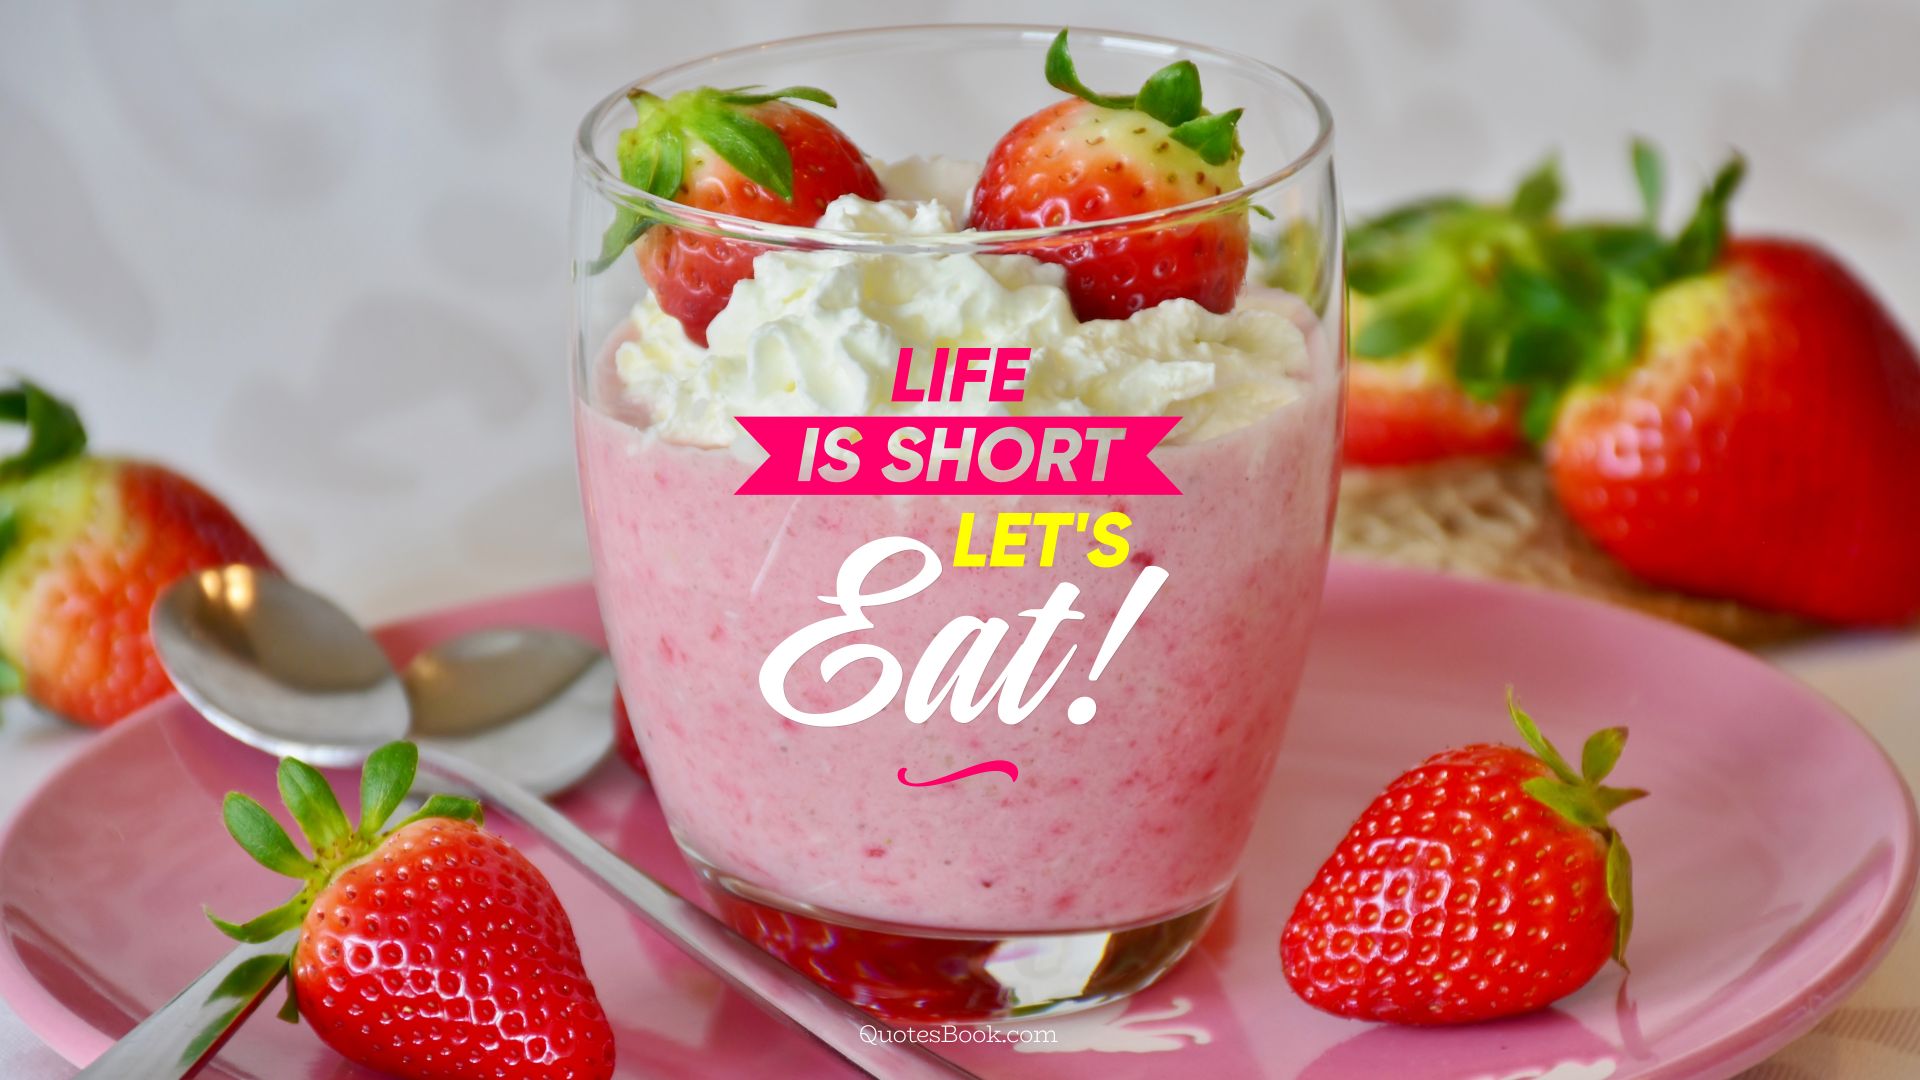 Life is short let's eat